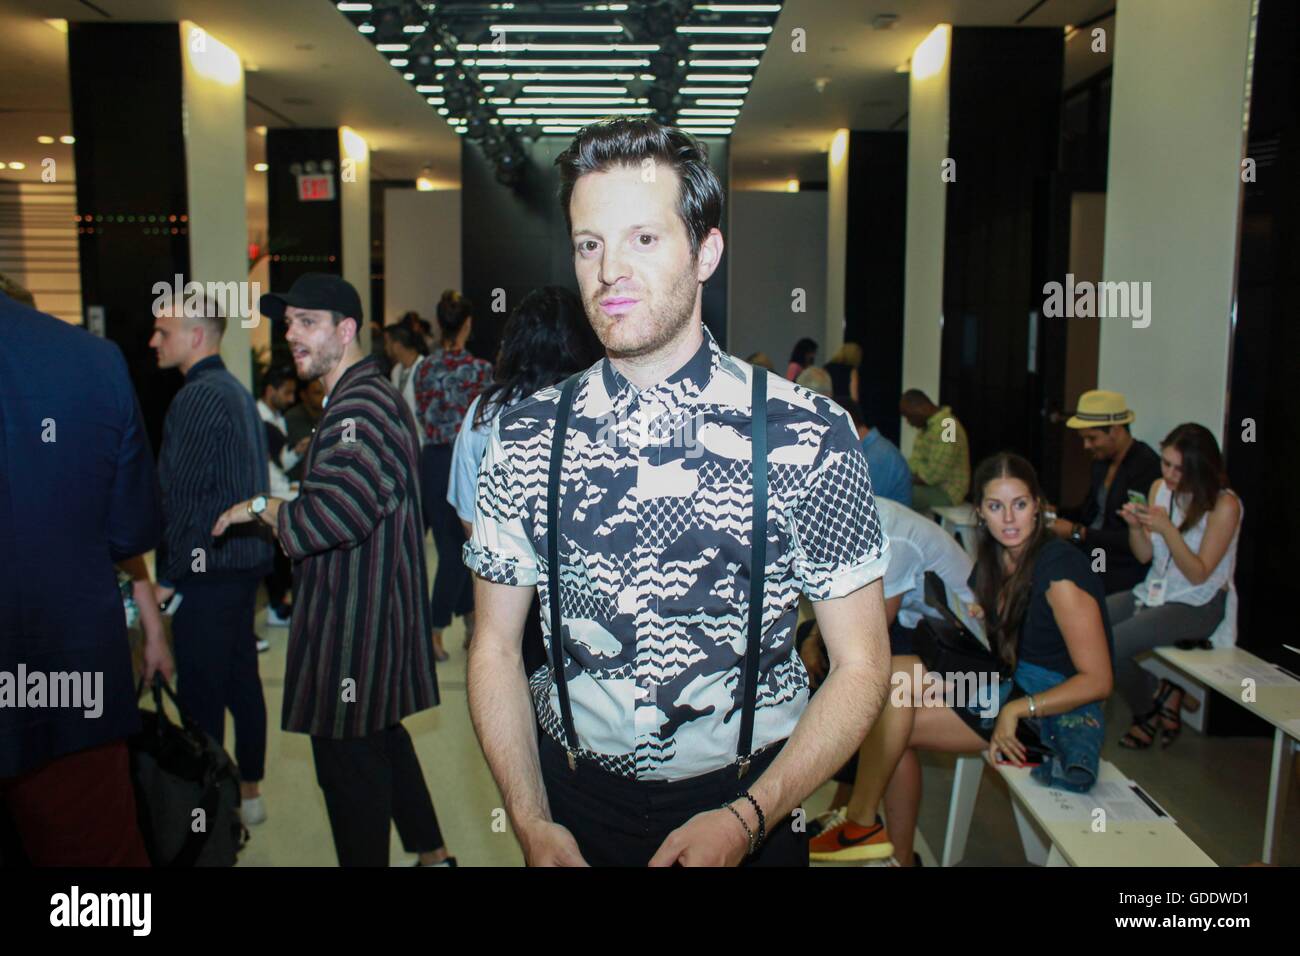 New York, NY, USA. 14th July, 2016. Mayer Hawthorne in attendance for Timo Weiland Men's Runway Show - Spring/Summer 2017, Cadillac House, New York, NY July 14, 2016. © Achim Harding/Everett Collection/Alamy Live News Stock Photo